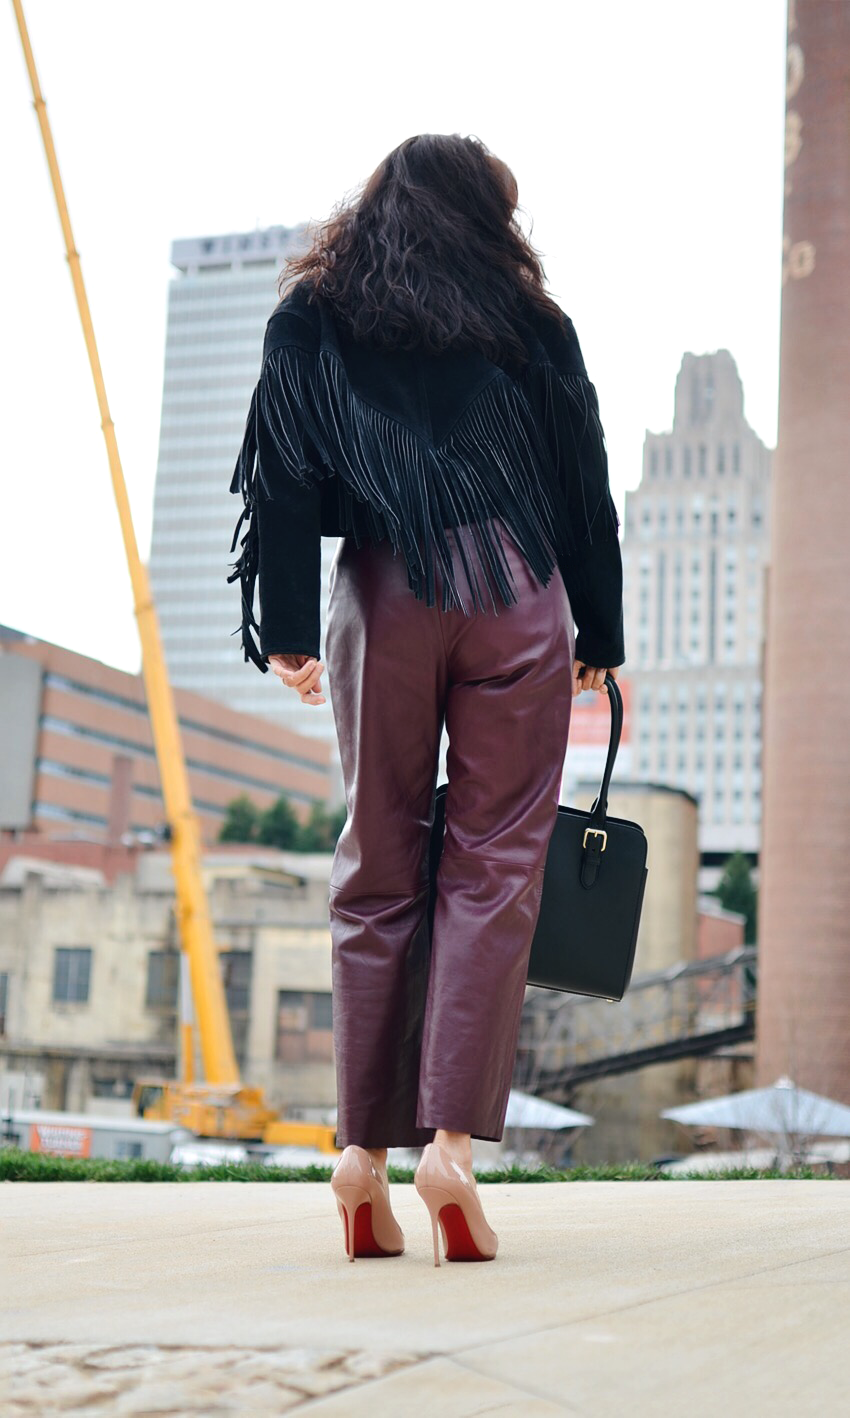 Leather on leather street style 